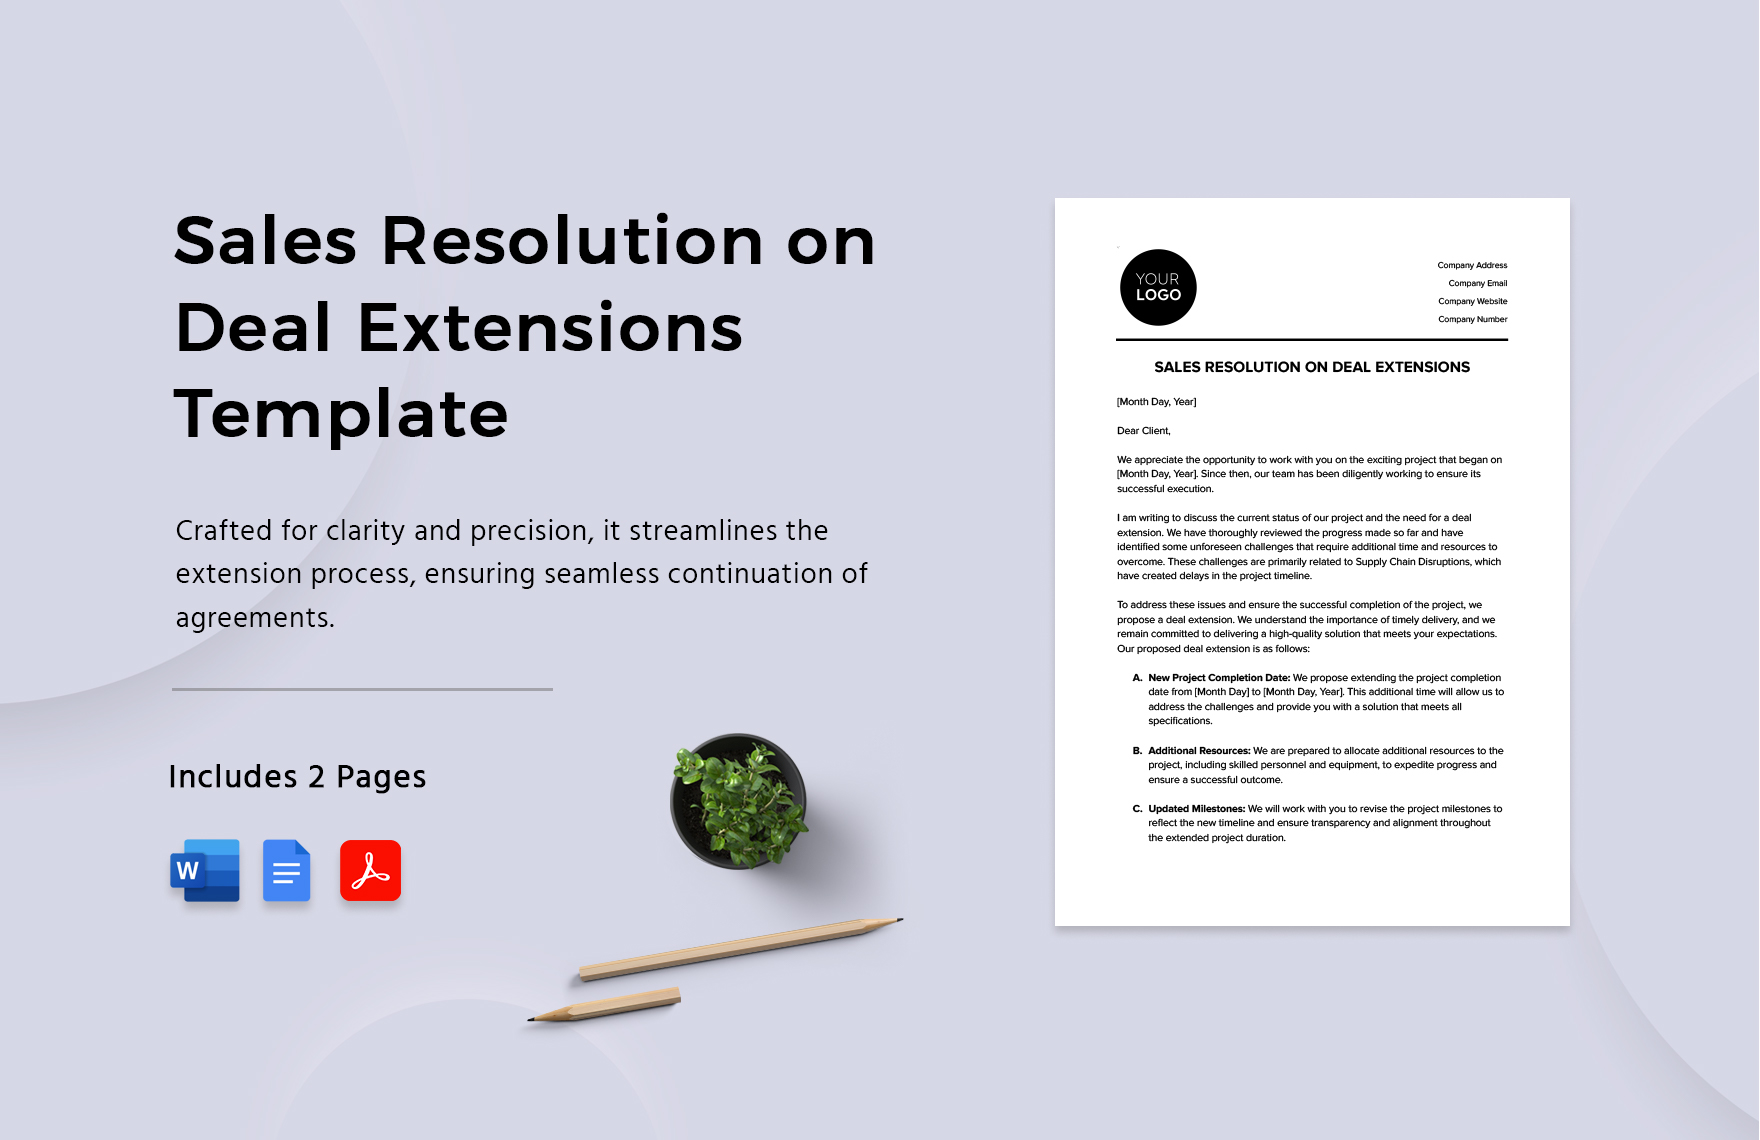  Sales Resolution on Deal Extensions Template